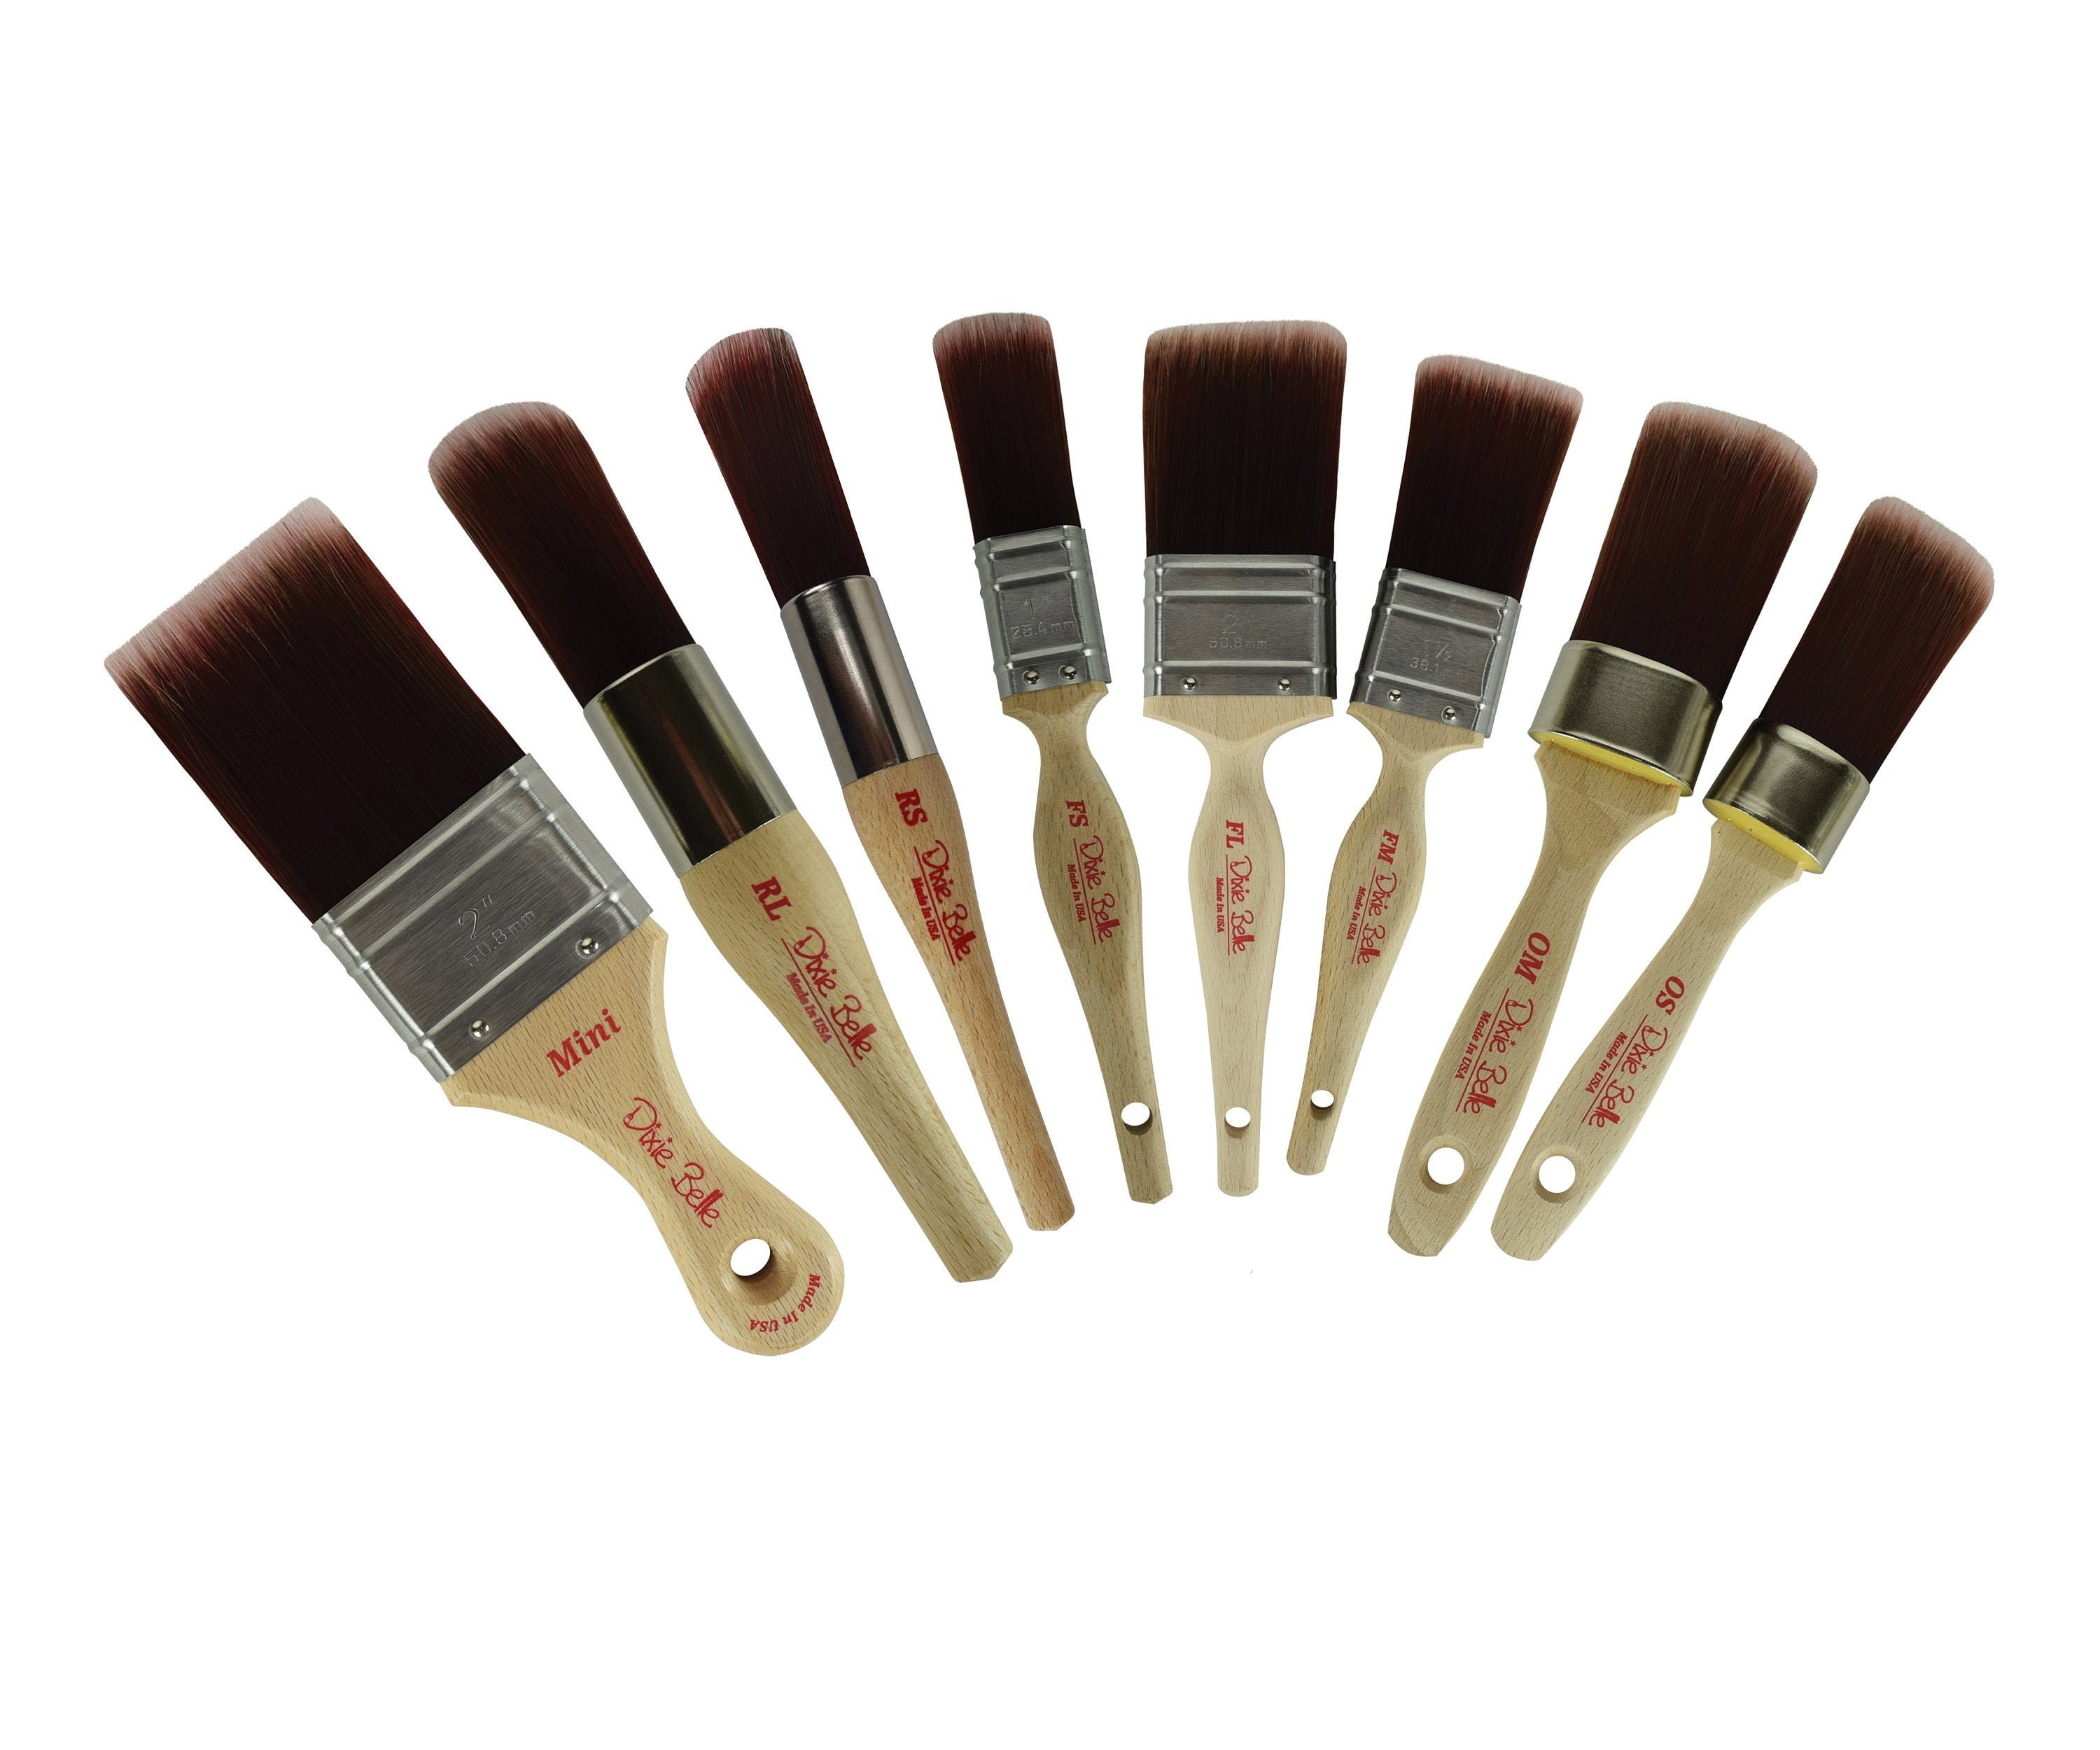 Royal & Langnickel Mini Majestic Fine Detail Assorted Paint Brushes